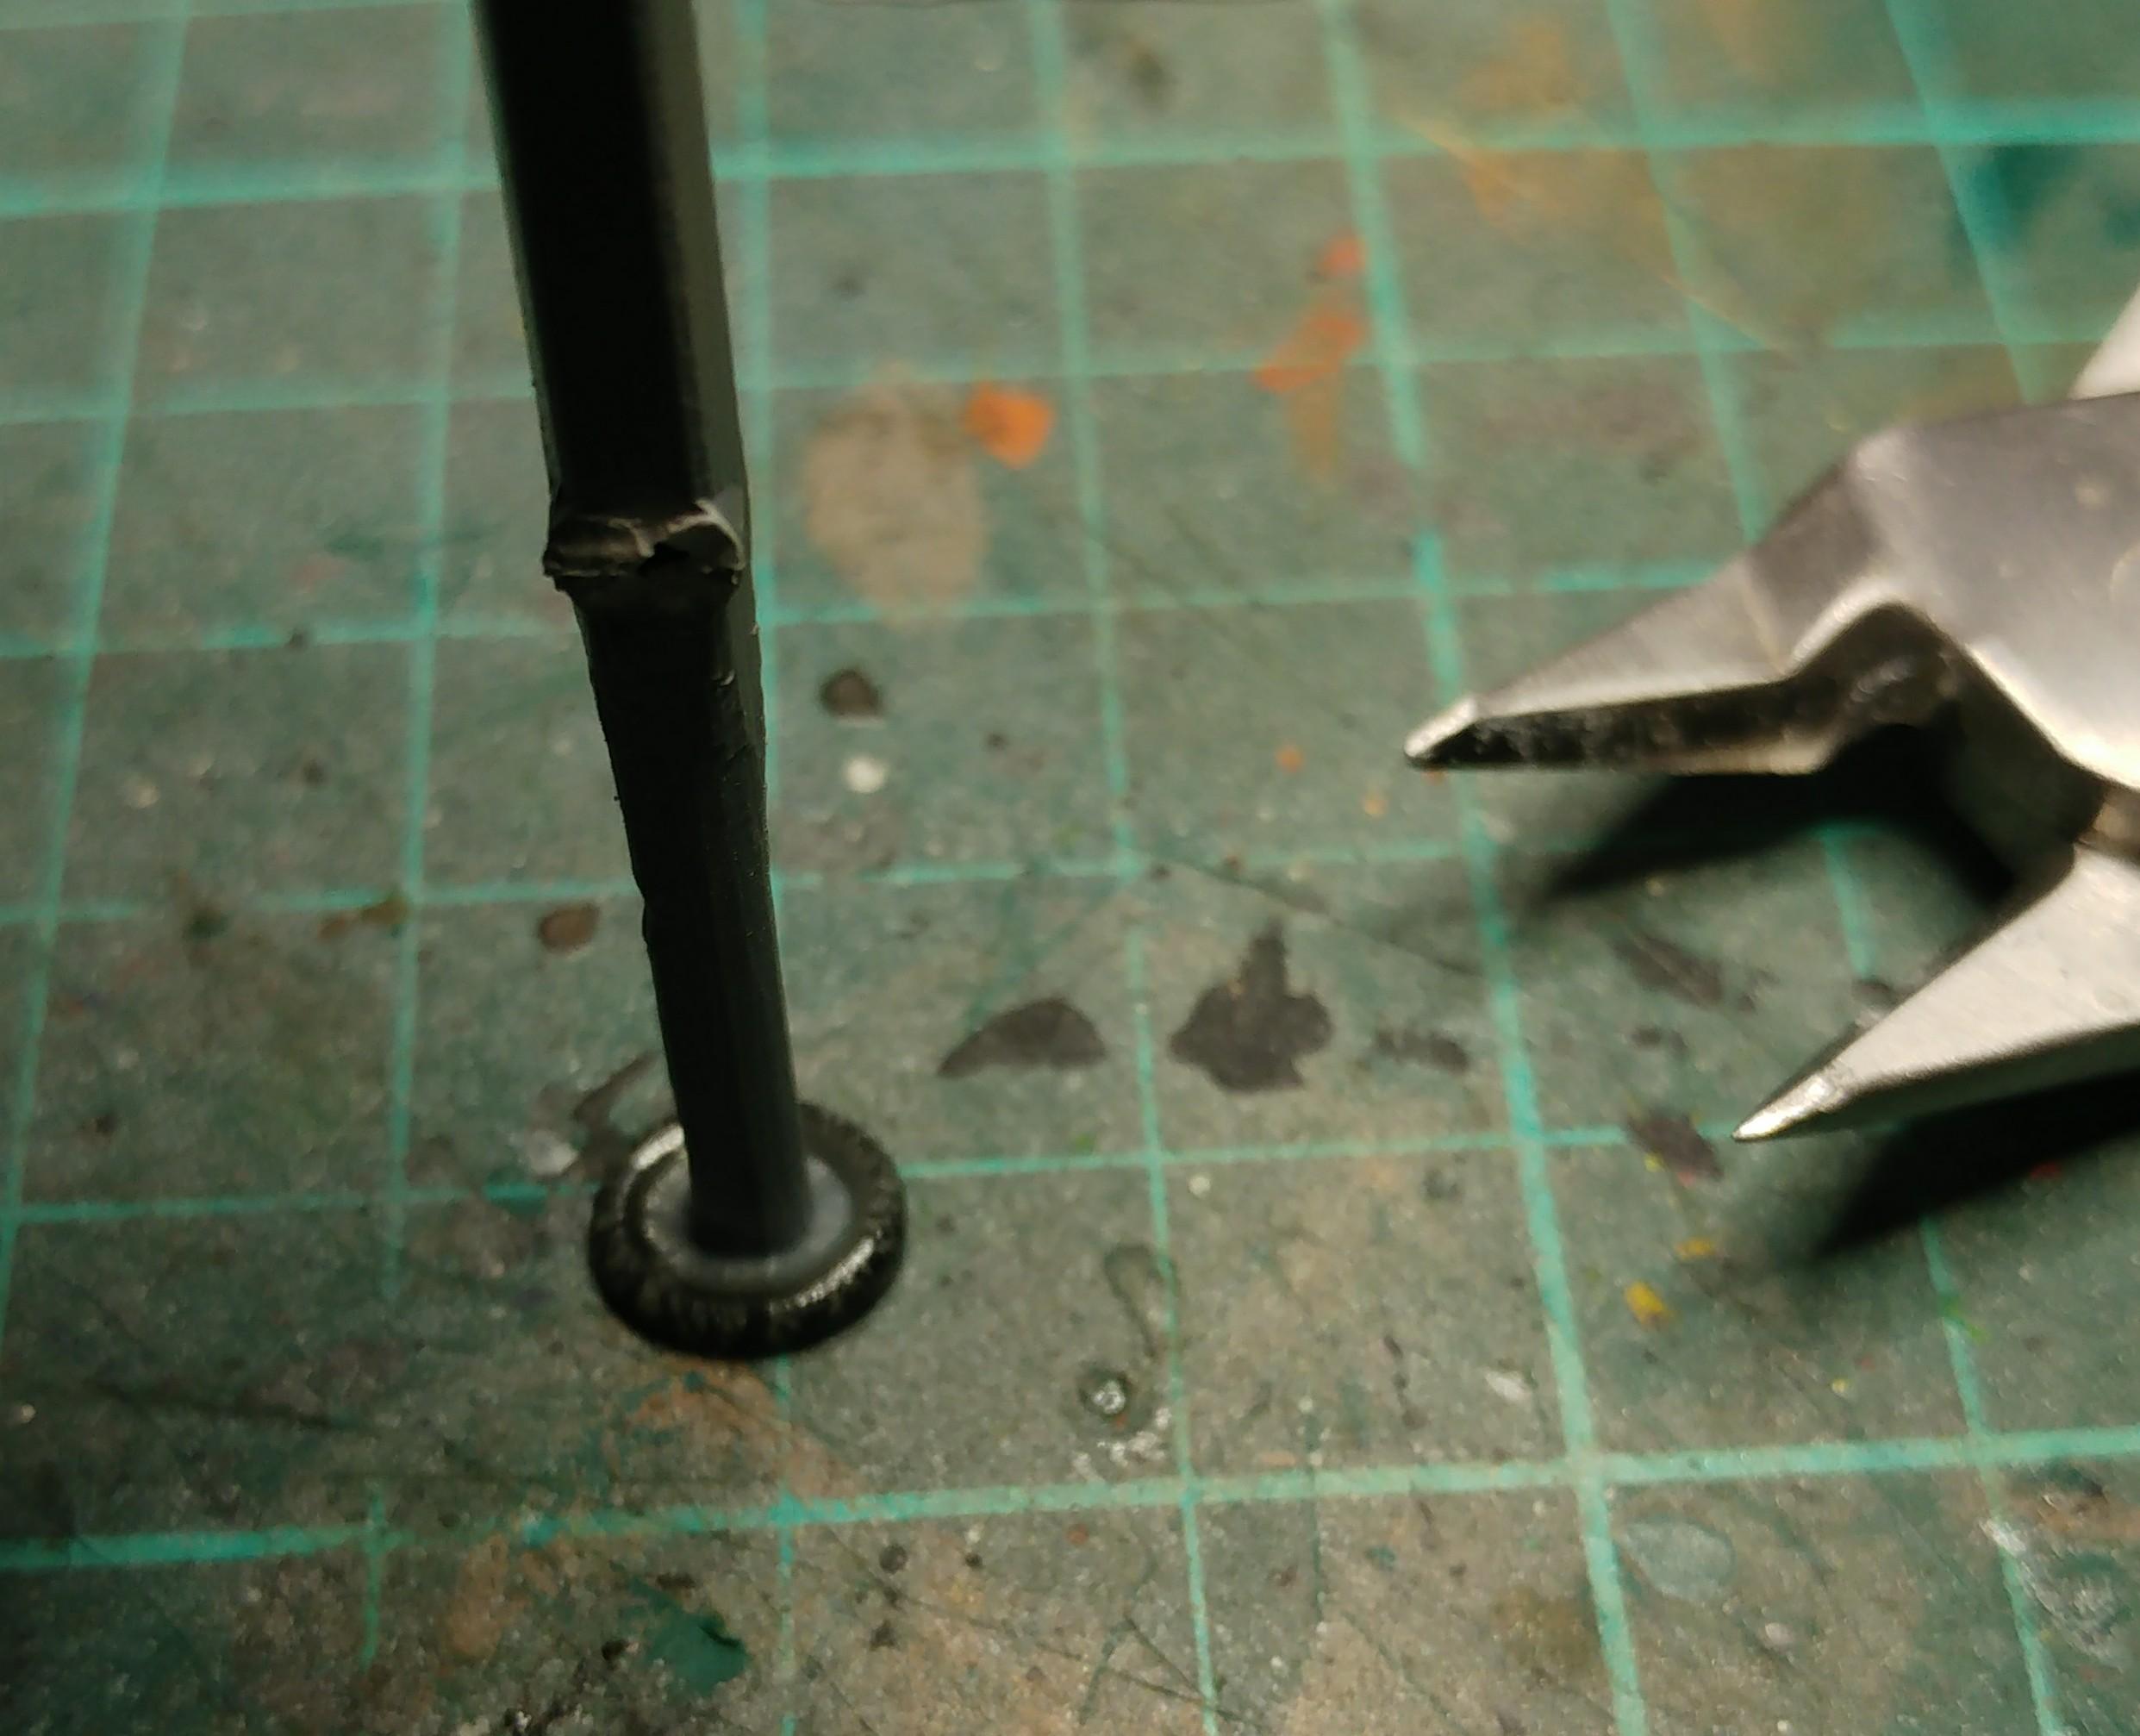 3 - (sprue) press the melted end onto a smooth surface